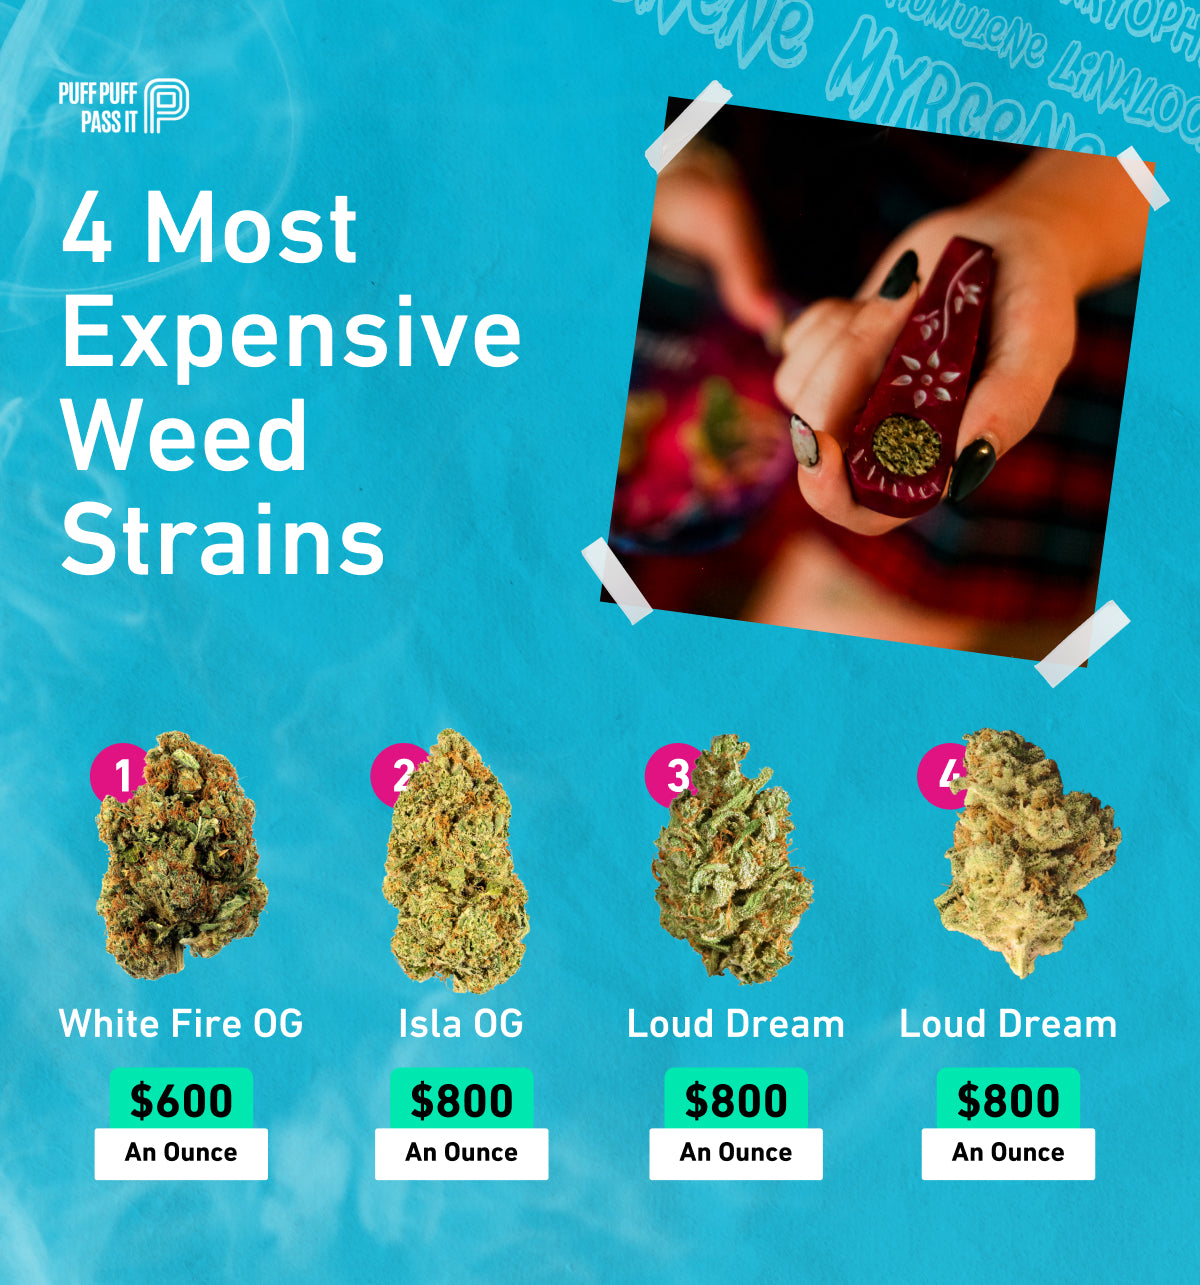 4 most expensive weed strains and cheaper alternatives